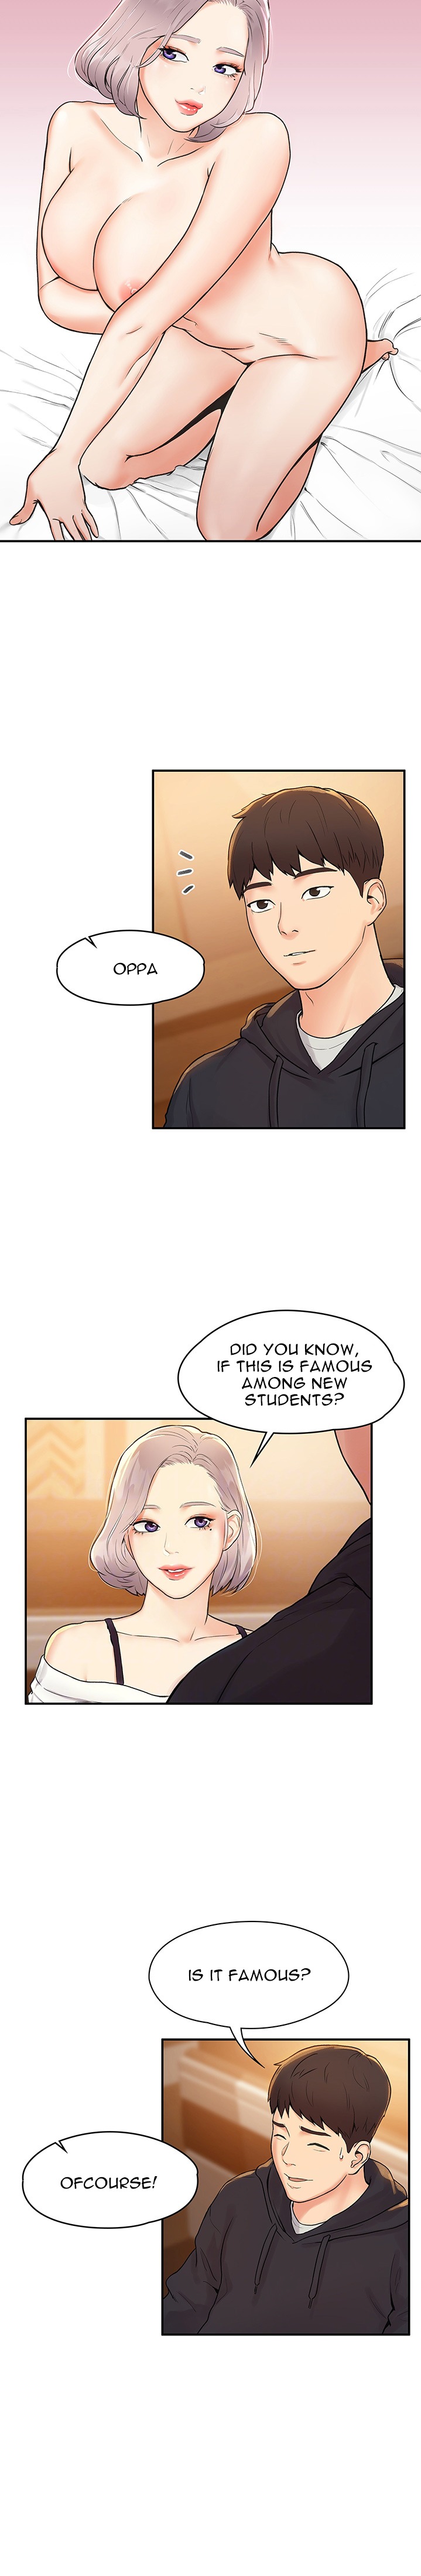 Campus Today - Chapter 3 Page 6